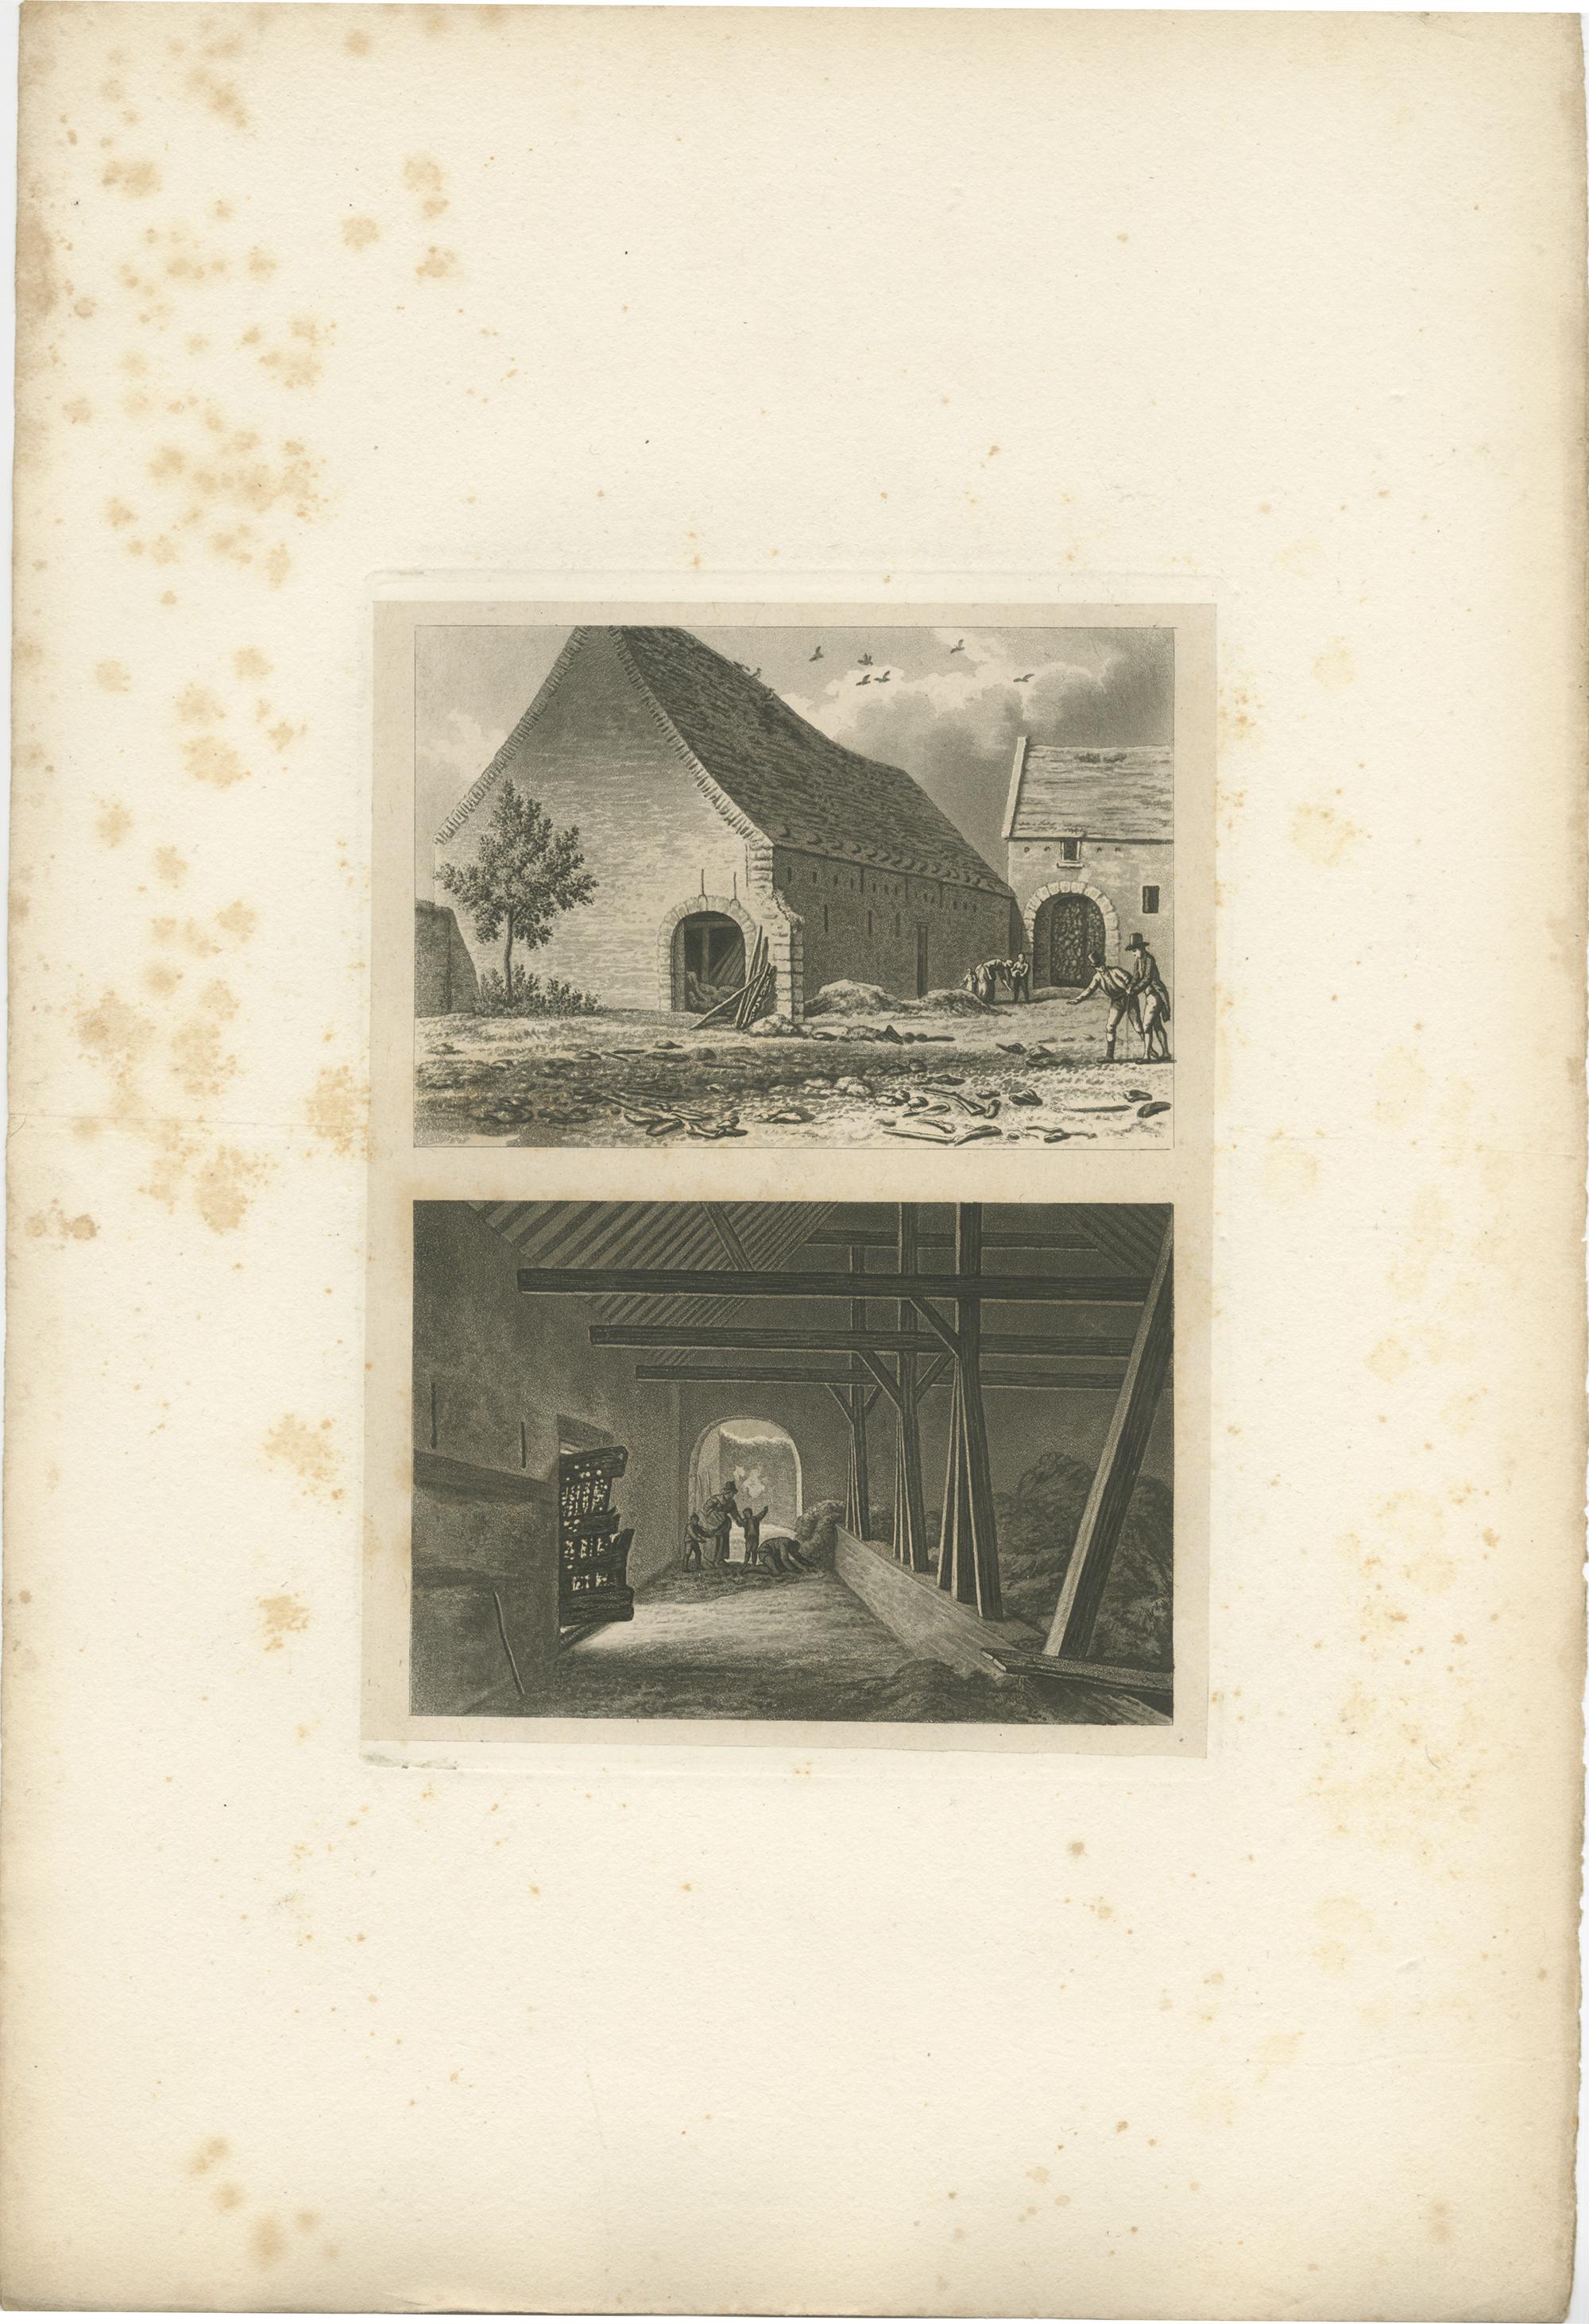 Set of four antique prints with views of Flanders and Holland. Published by or after Robert Hills, circa 1820.